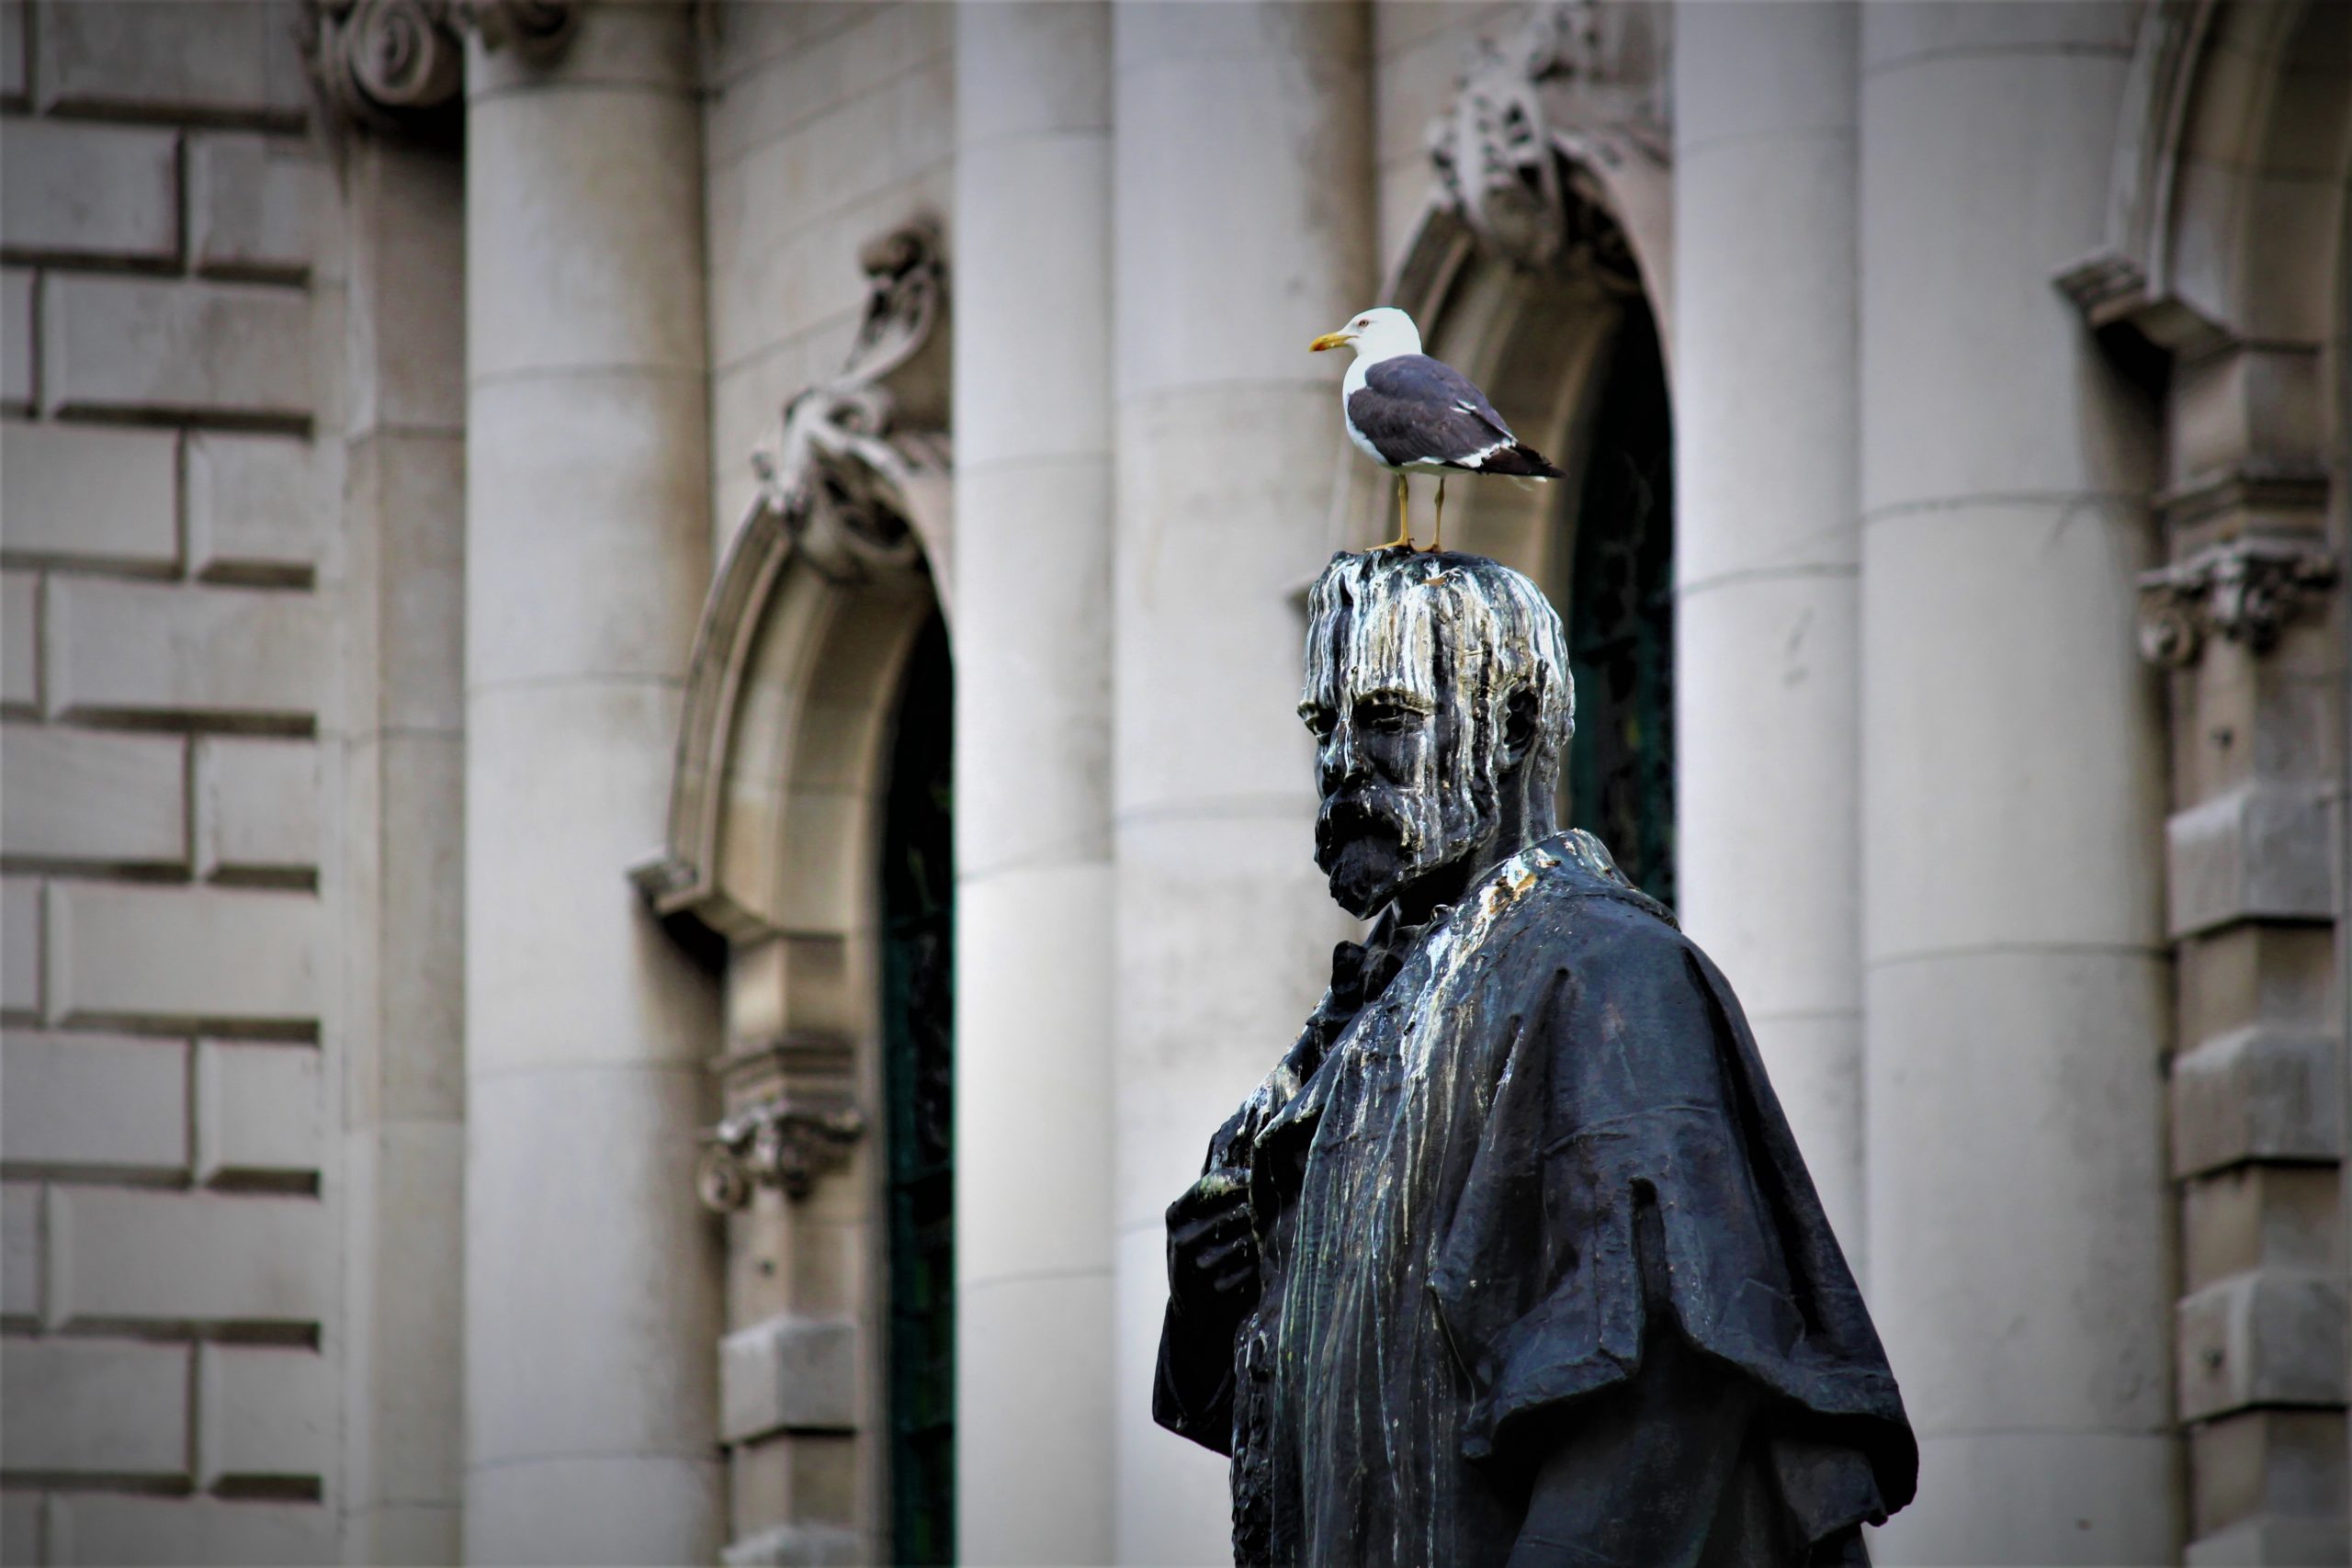 London statue covered in bird guano